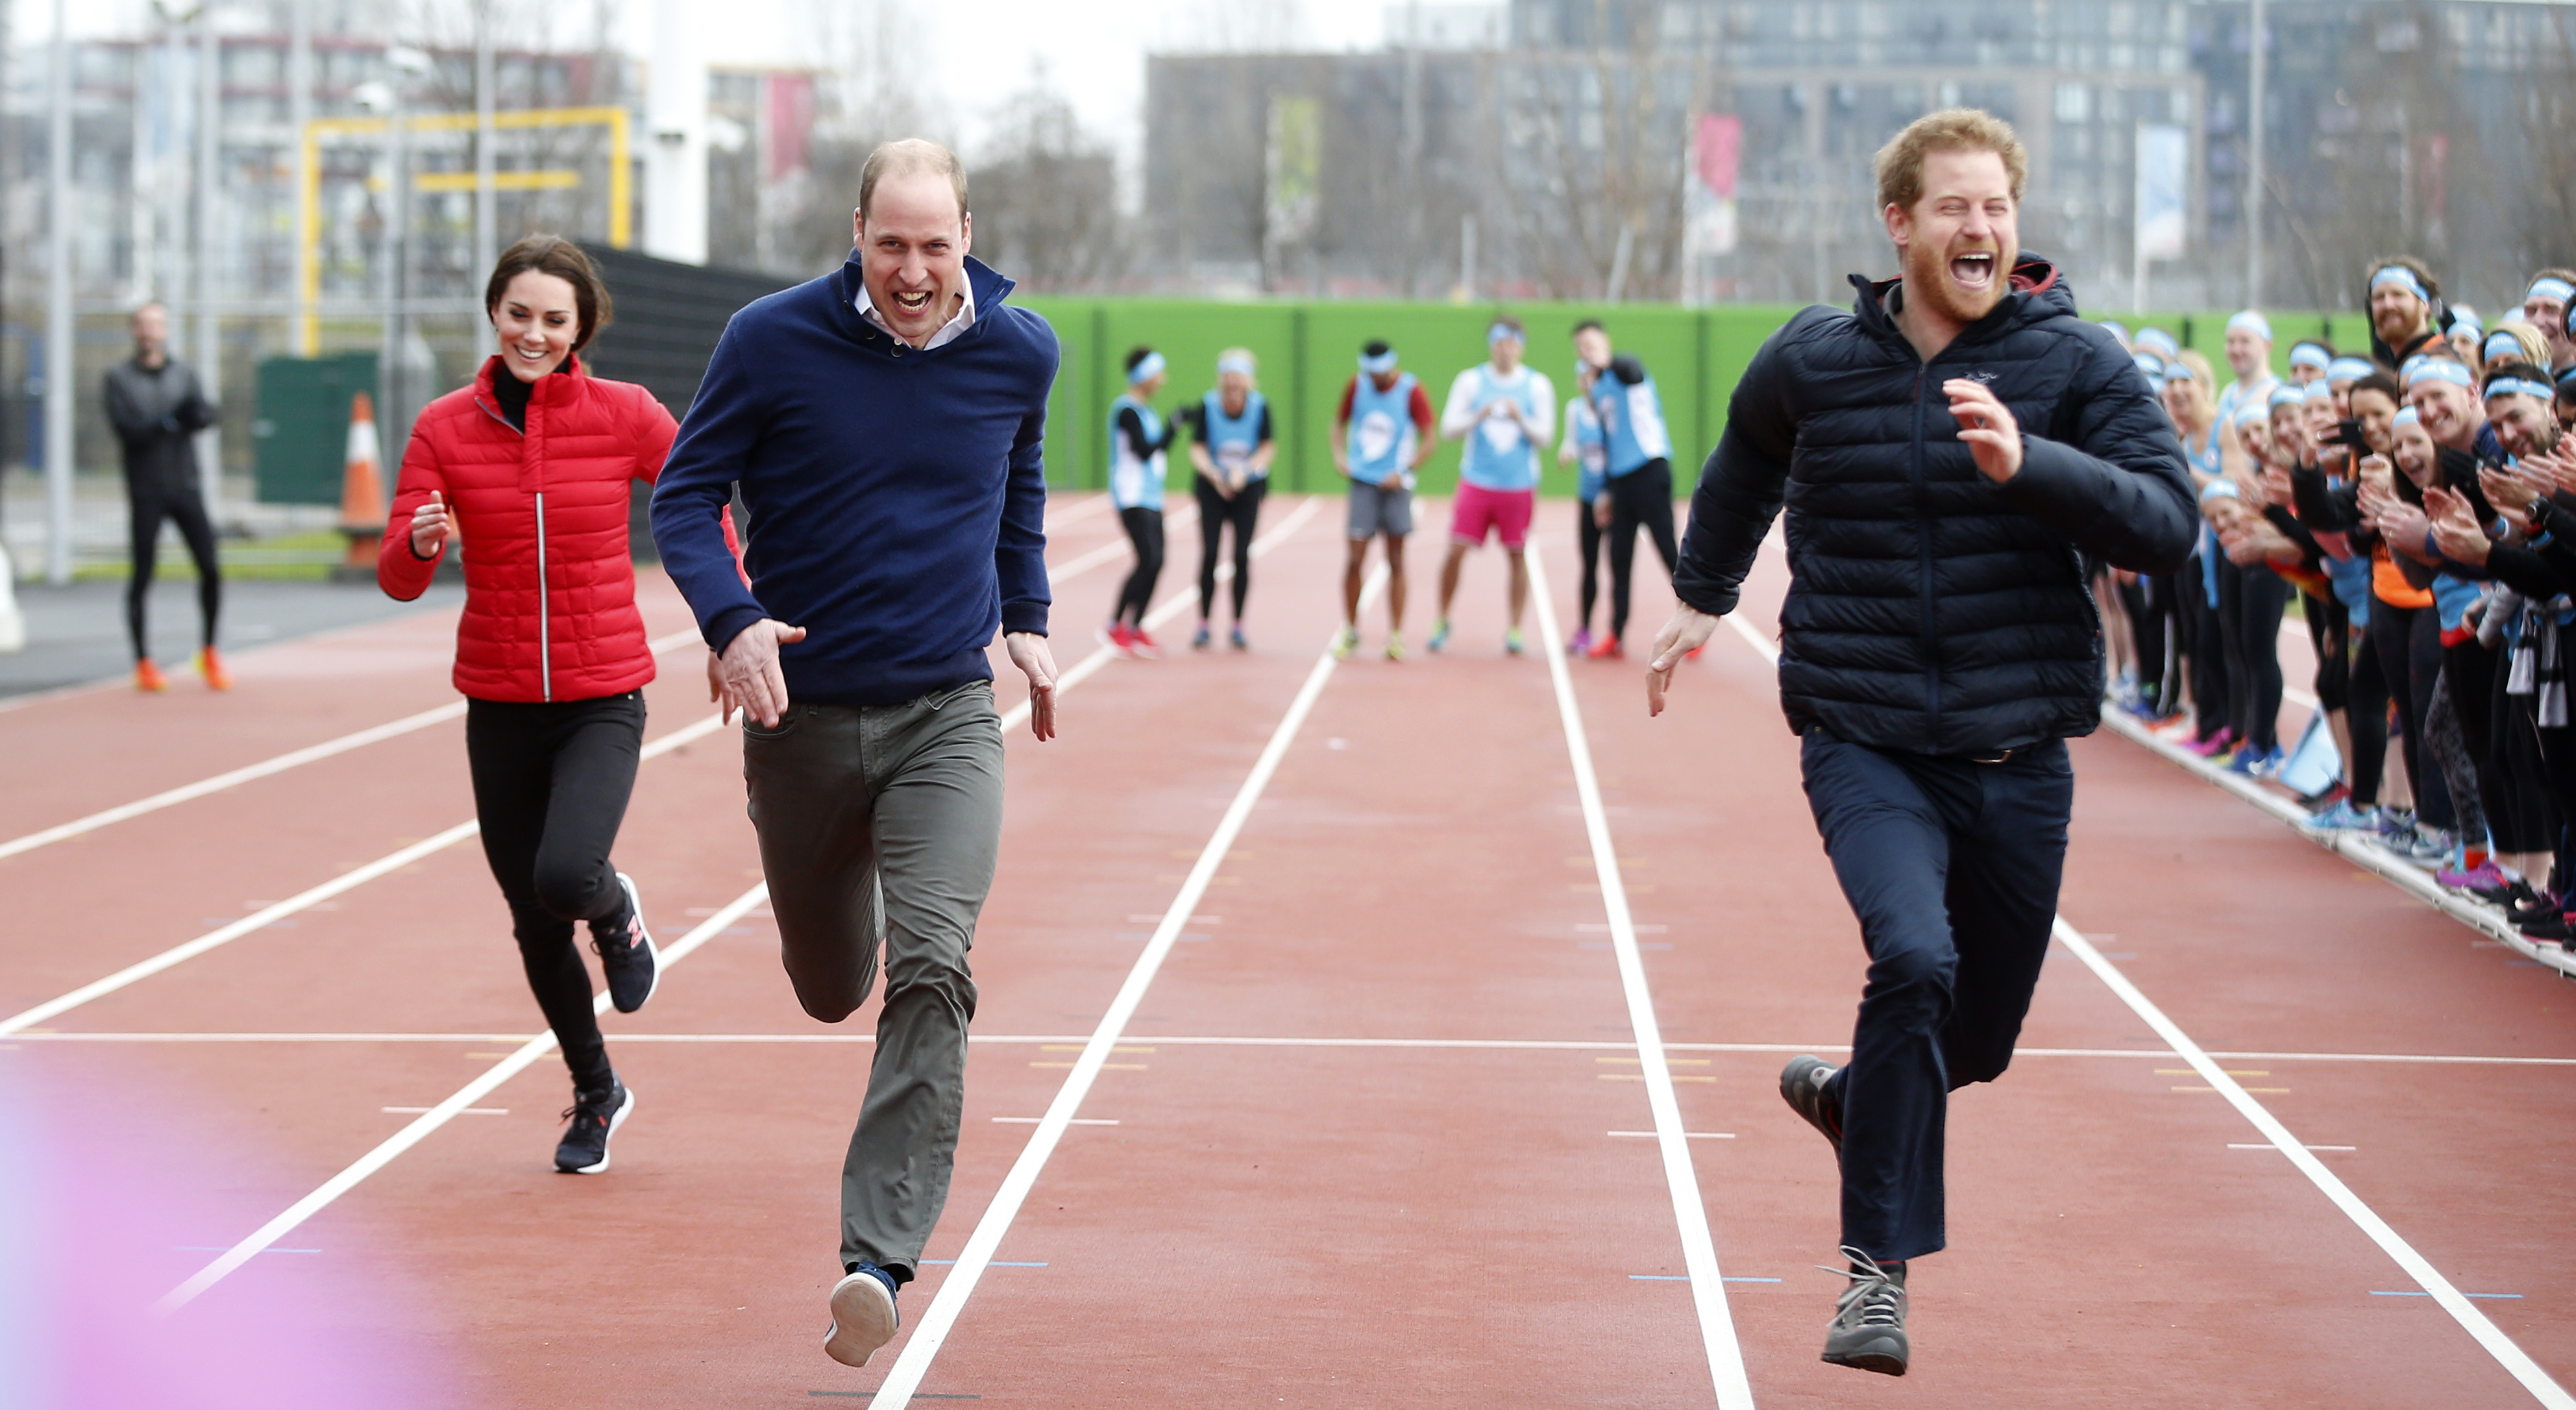 Catherine, Duchess of Cambridge, Prince William, Duke of Cambridge and Prince Harry race during a Marathon Training Day with Team Heads Together at the Queen Elizabeth Olympic Park on February 5, 2017 in London, England. (WPA Pool—Getty Images)